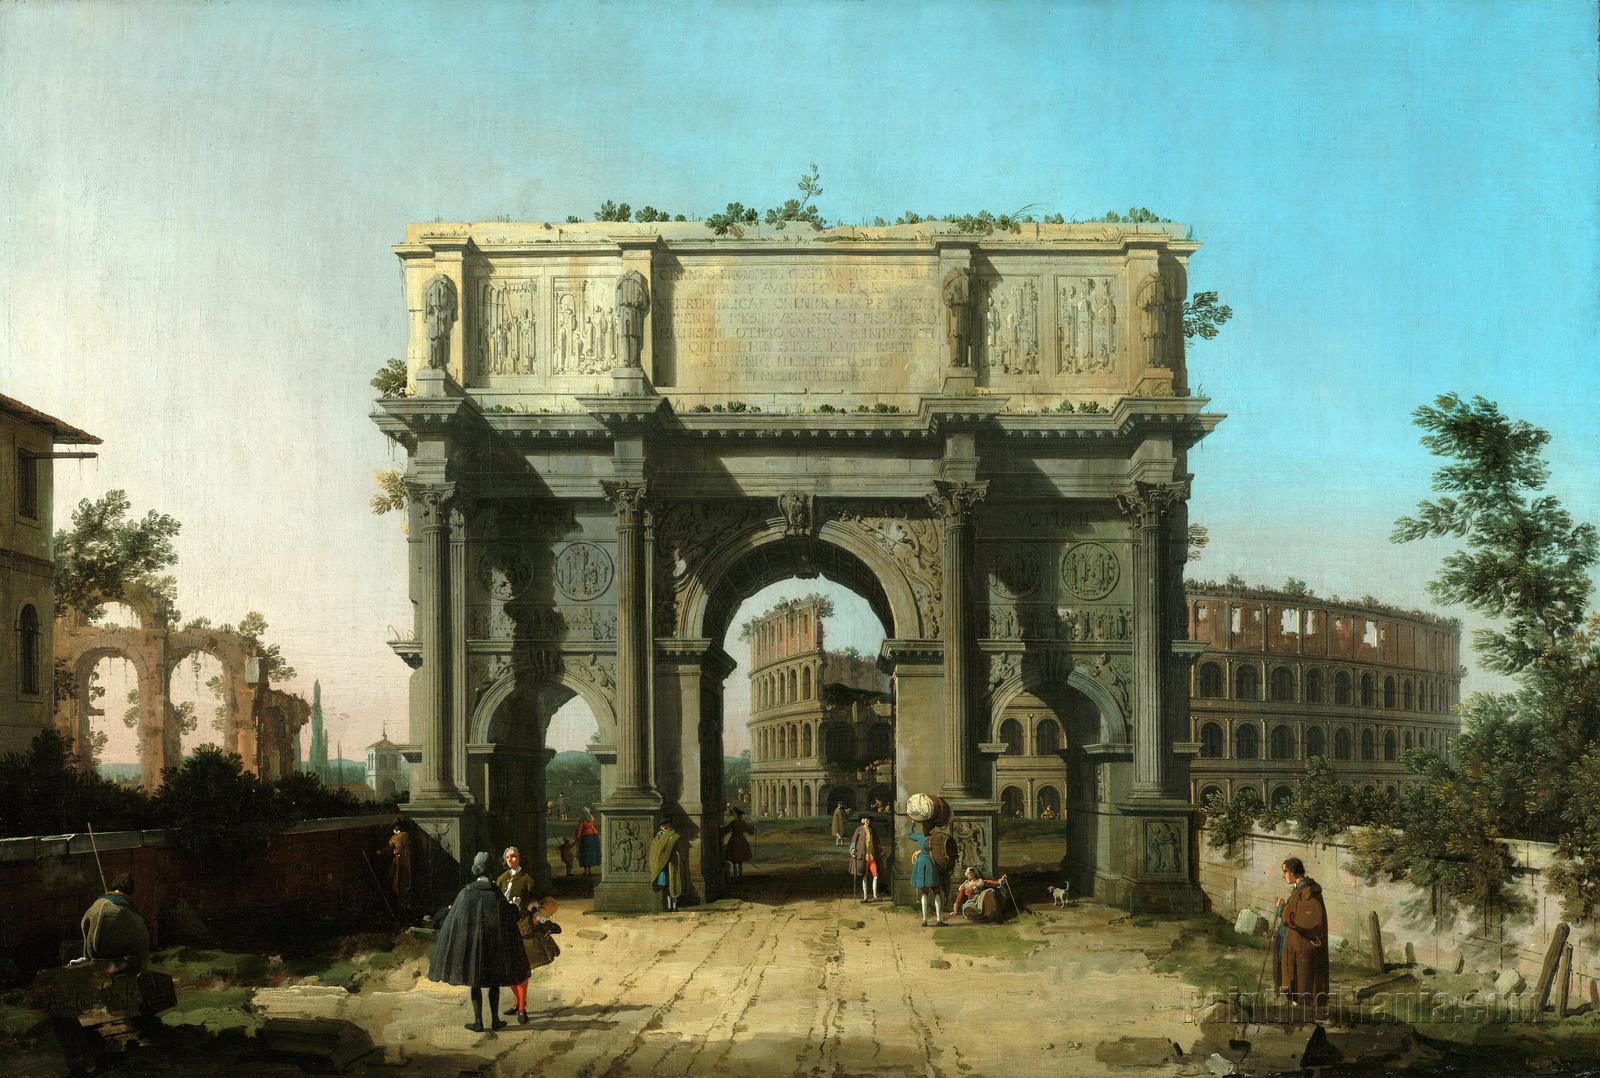 View the Arch of Constantine with the Coliseum